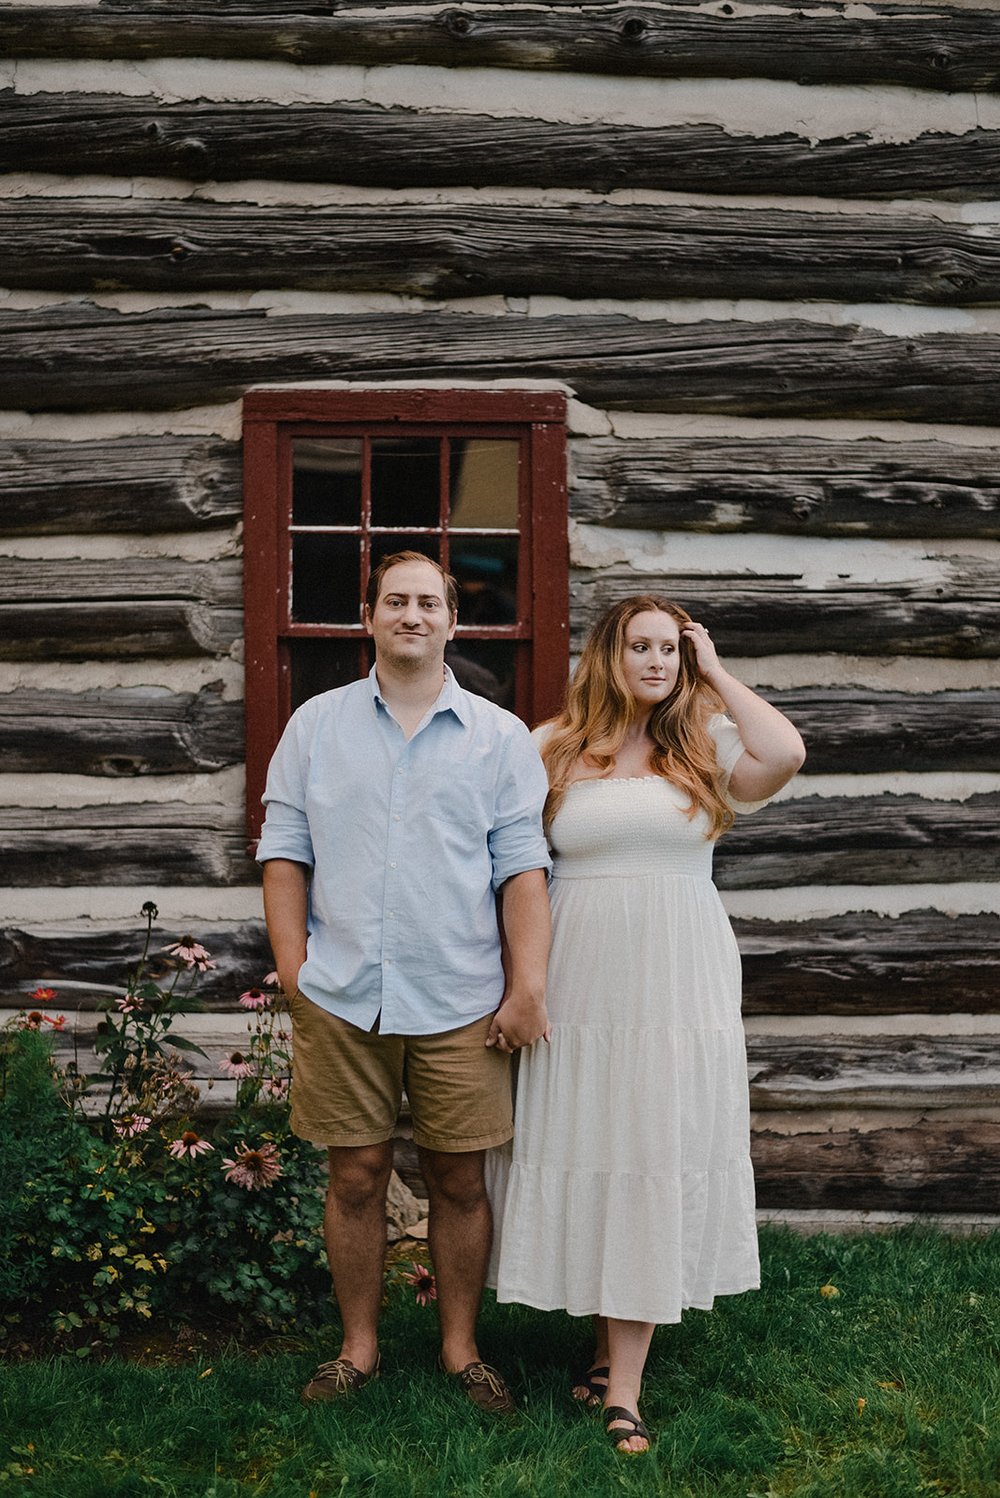 B+P _ Engagement-73Sharon Temple Museum in East Gwillimbury Ontario engagement session.jpg